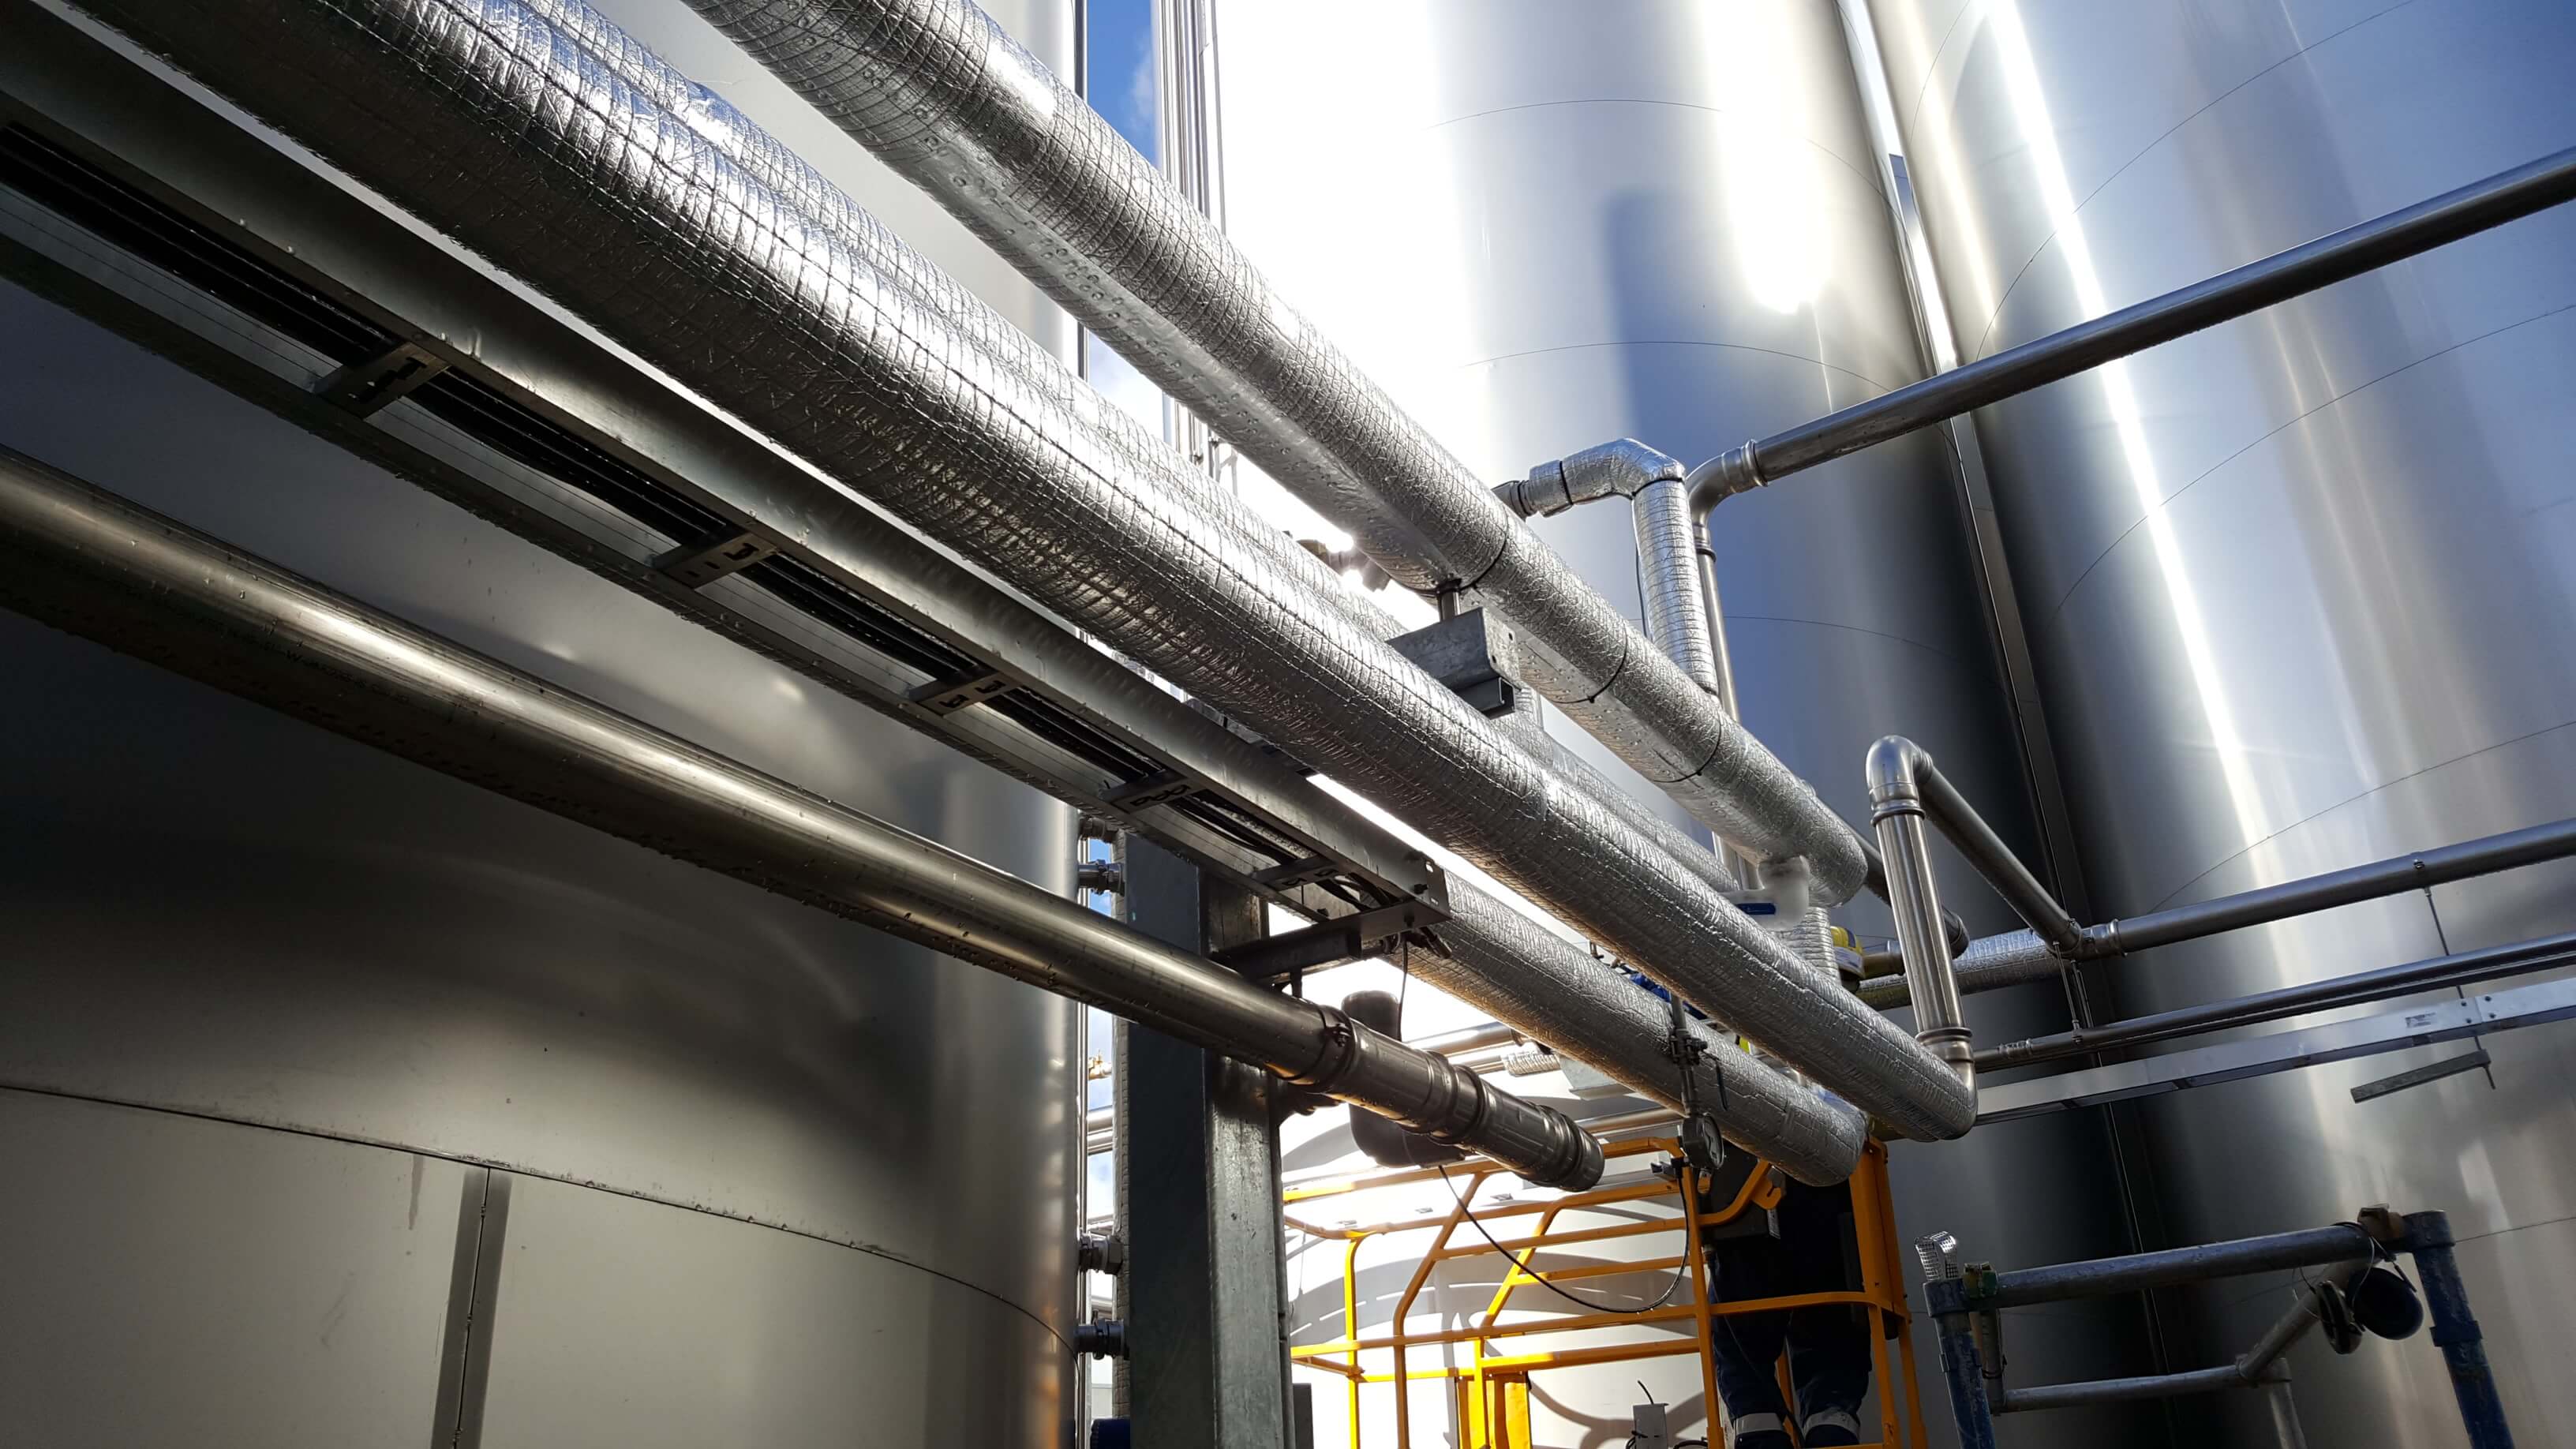 Pernod Ricard facility using europress press-fit piping system for Glycol, Nitrogen, Air, Water